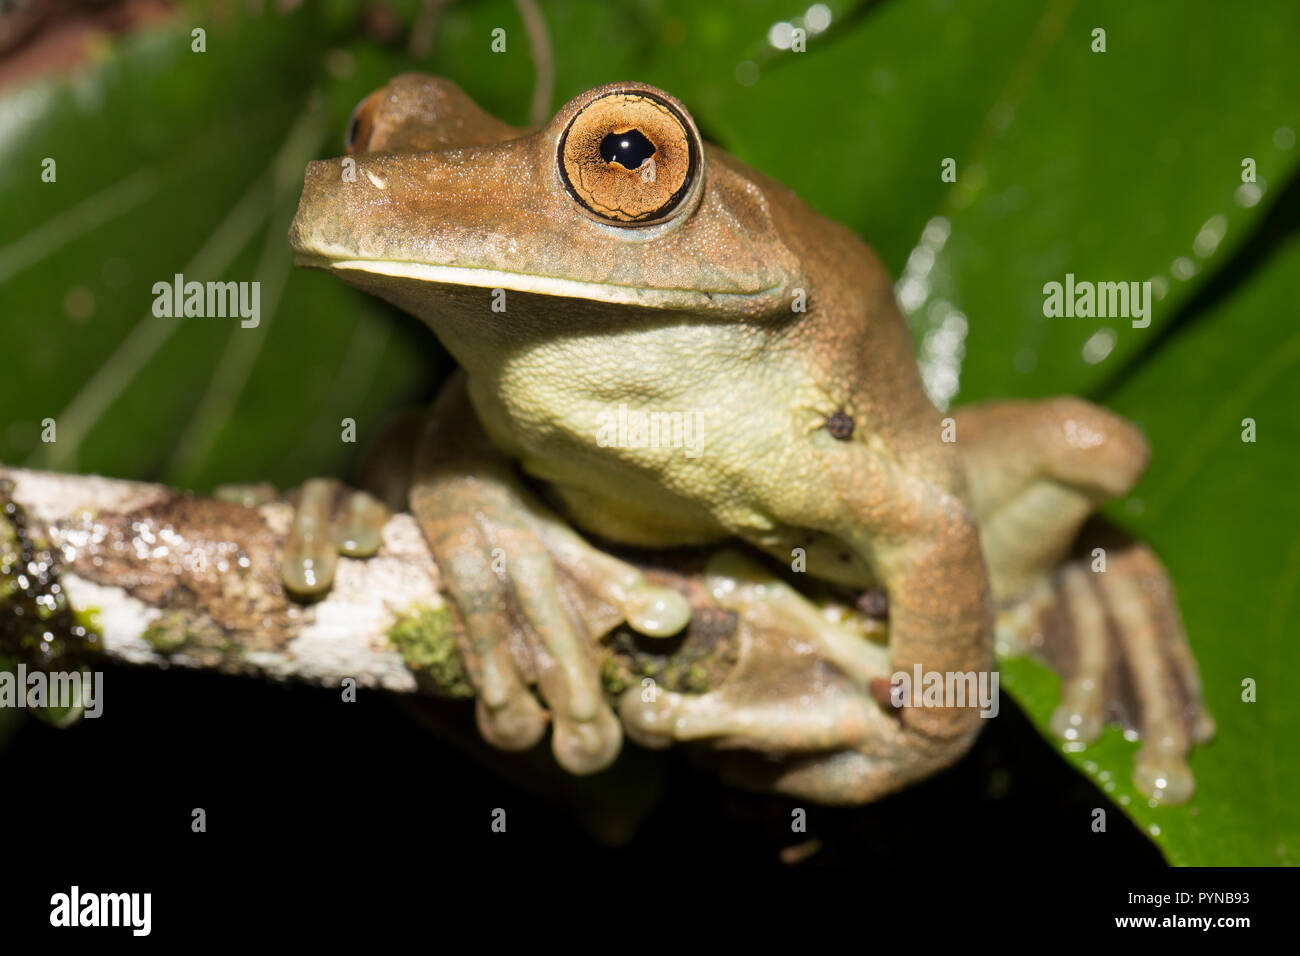 A tree frog photographed in the jungles of Suriname near Botapassie on the Suriname River. Suriname is noted for its unspoiled rainforests and biodive Stock Photo